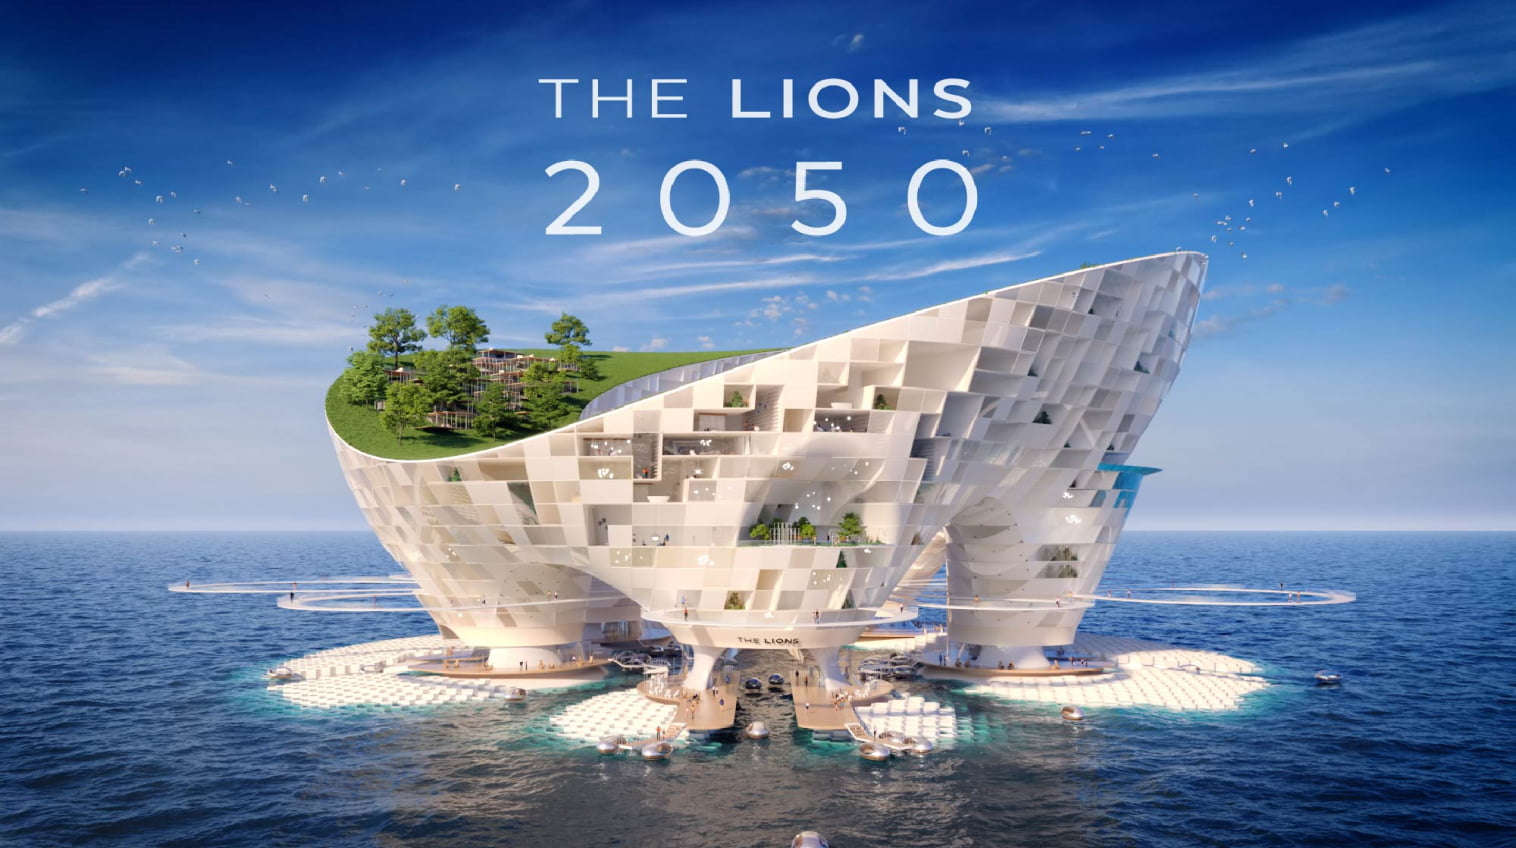 THE LIONS 2050